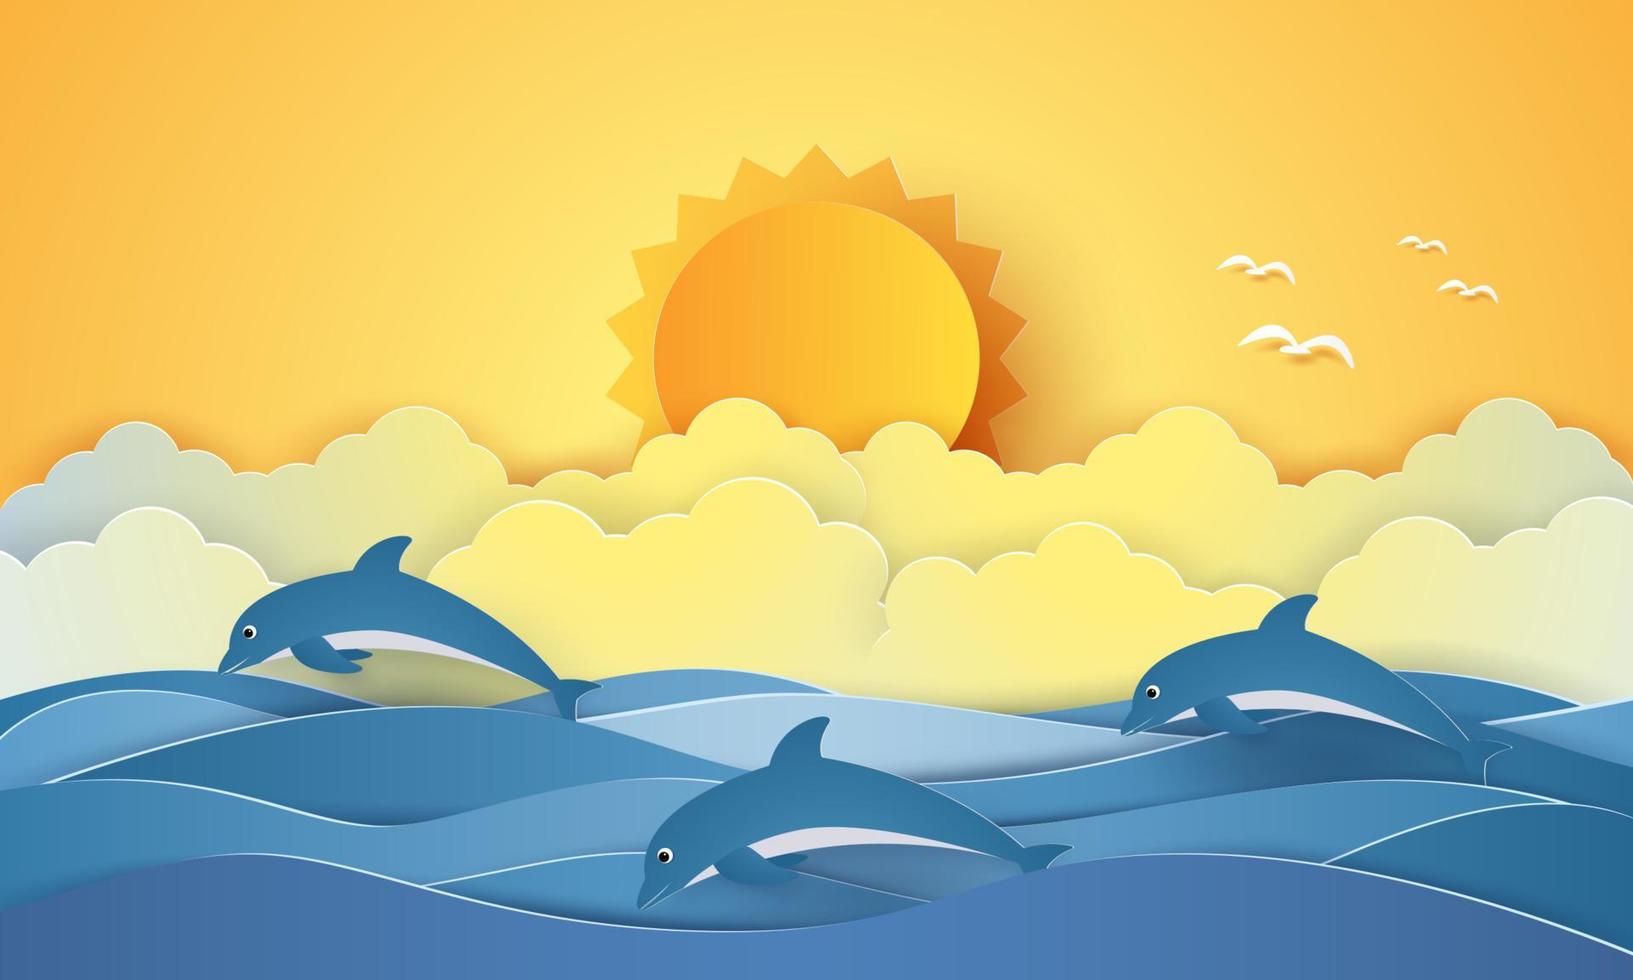 Summer time, sea with dolphins and sun, paper art style vector